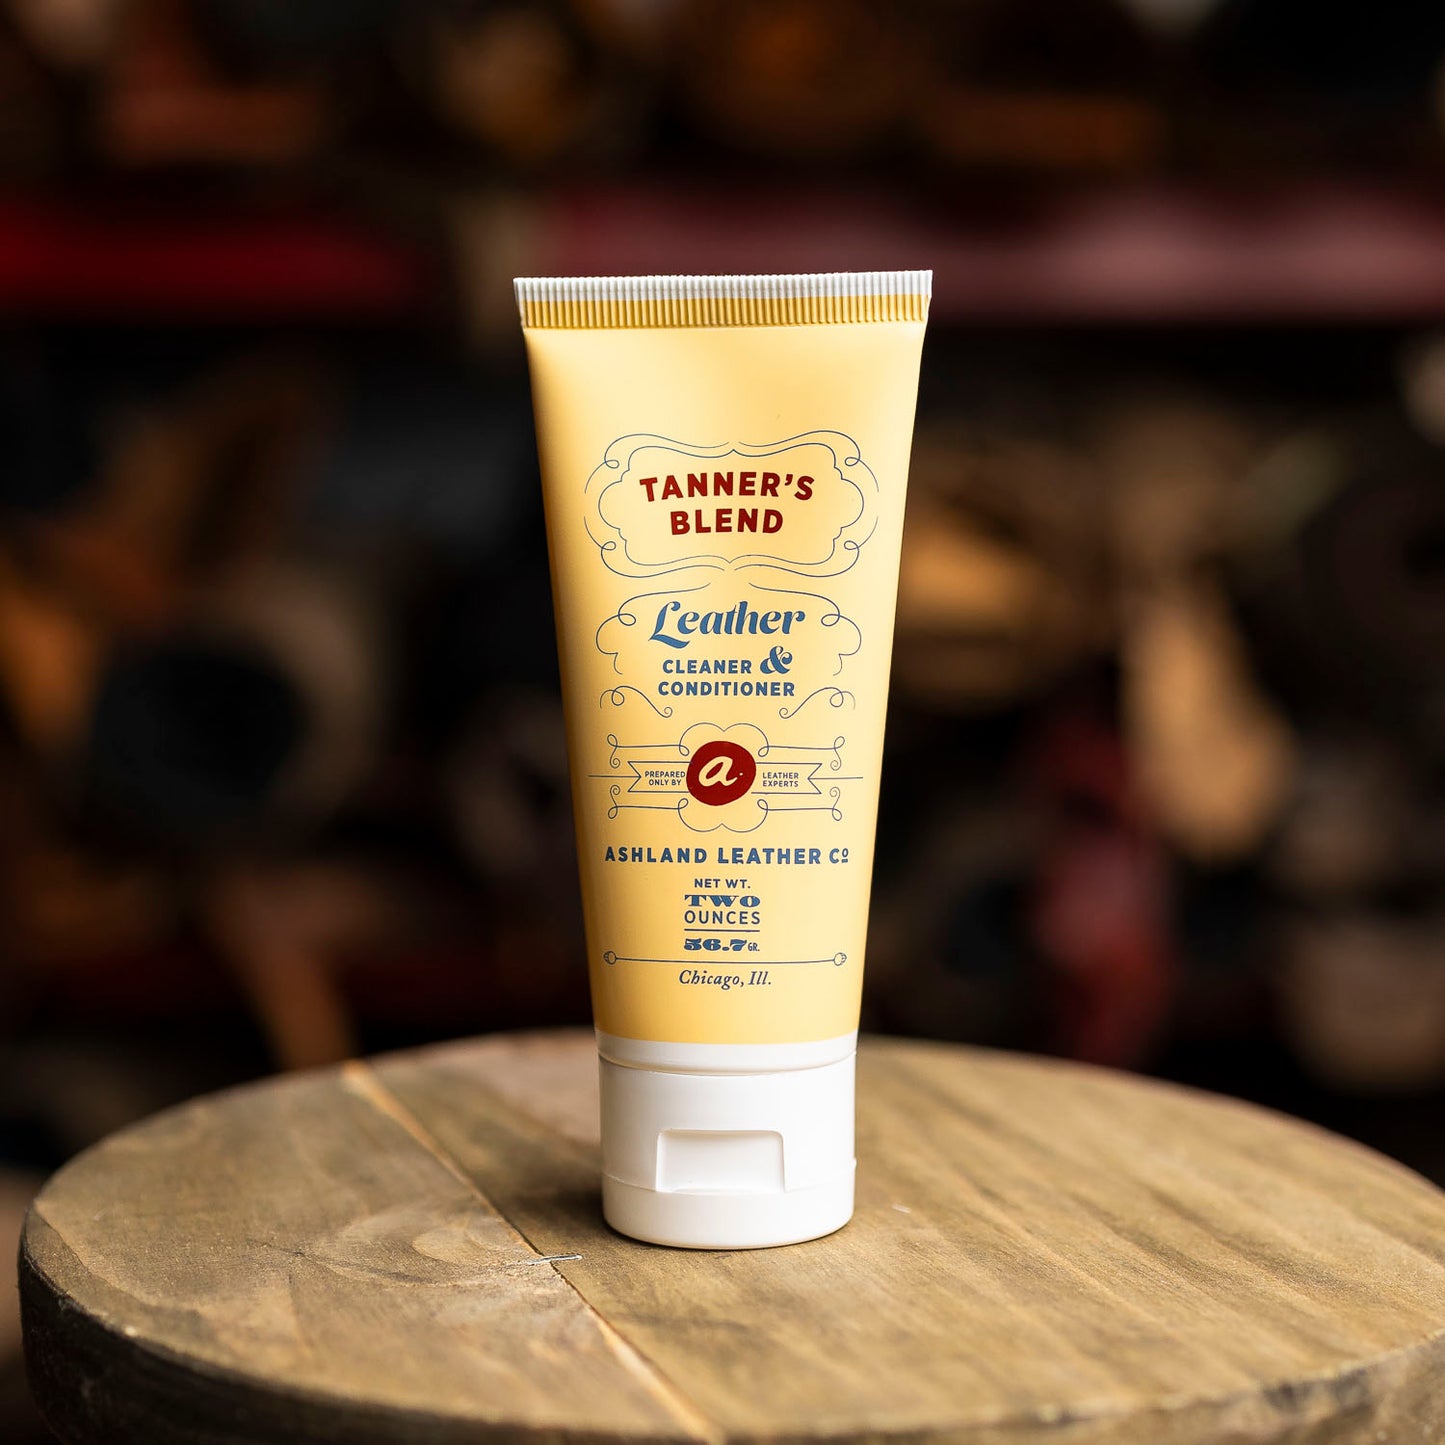 Tanner's Blend Leather Conditioner